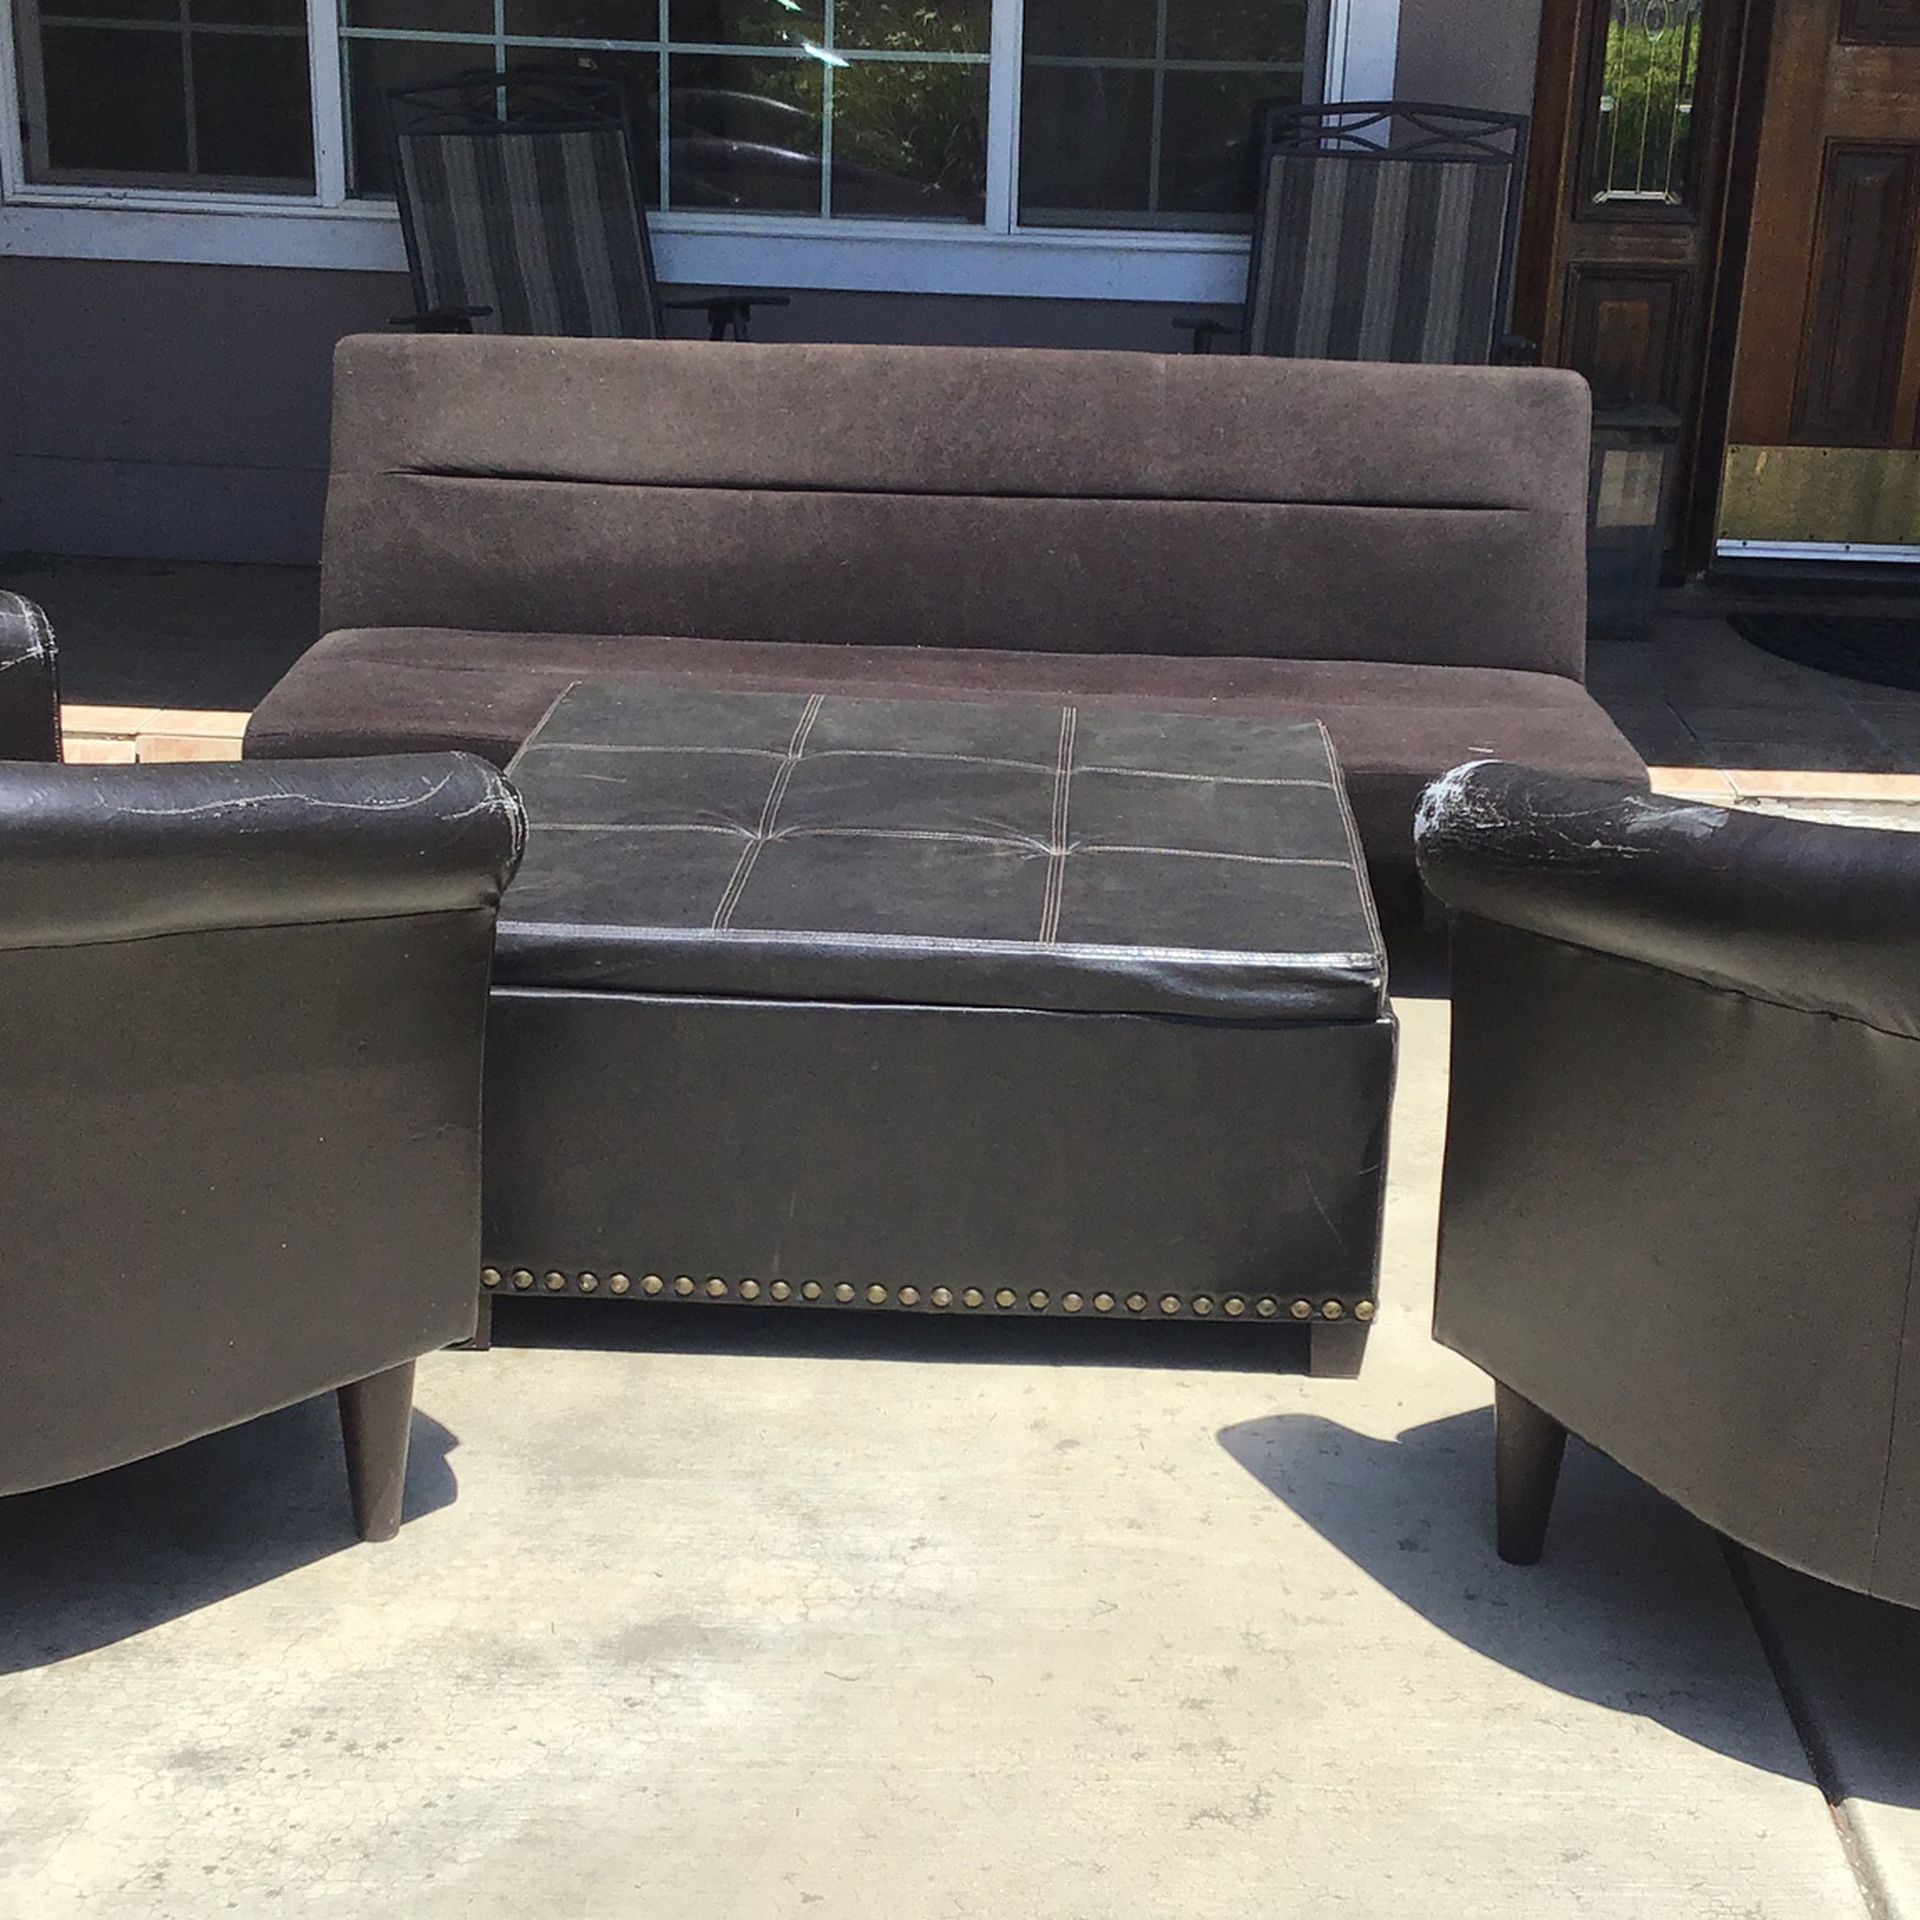 Leather Ottoman W/ Hinged Storage , Bucket Seats, Black Futon(can Be Used As Twin Sz. Bed Base)